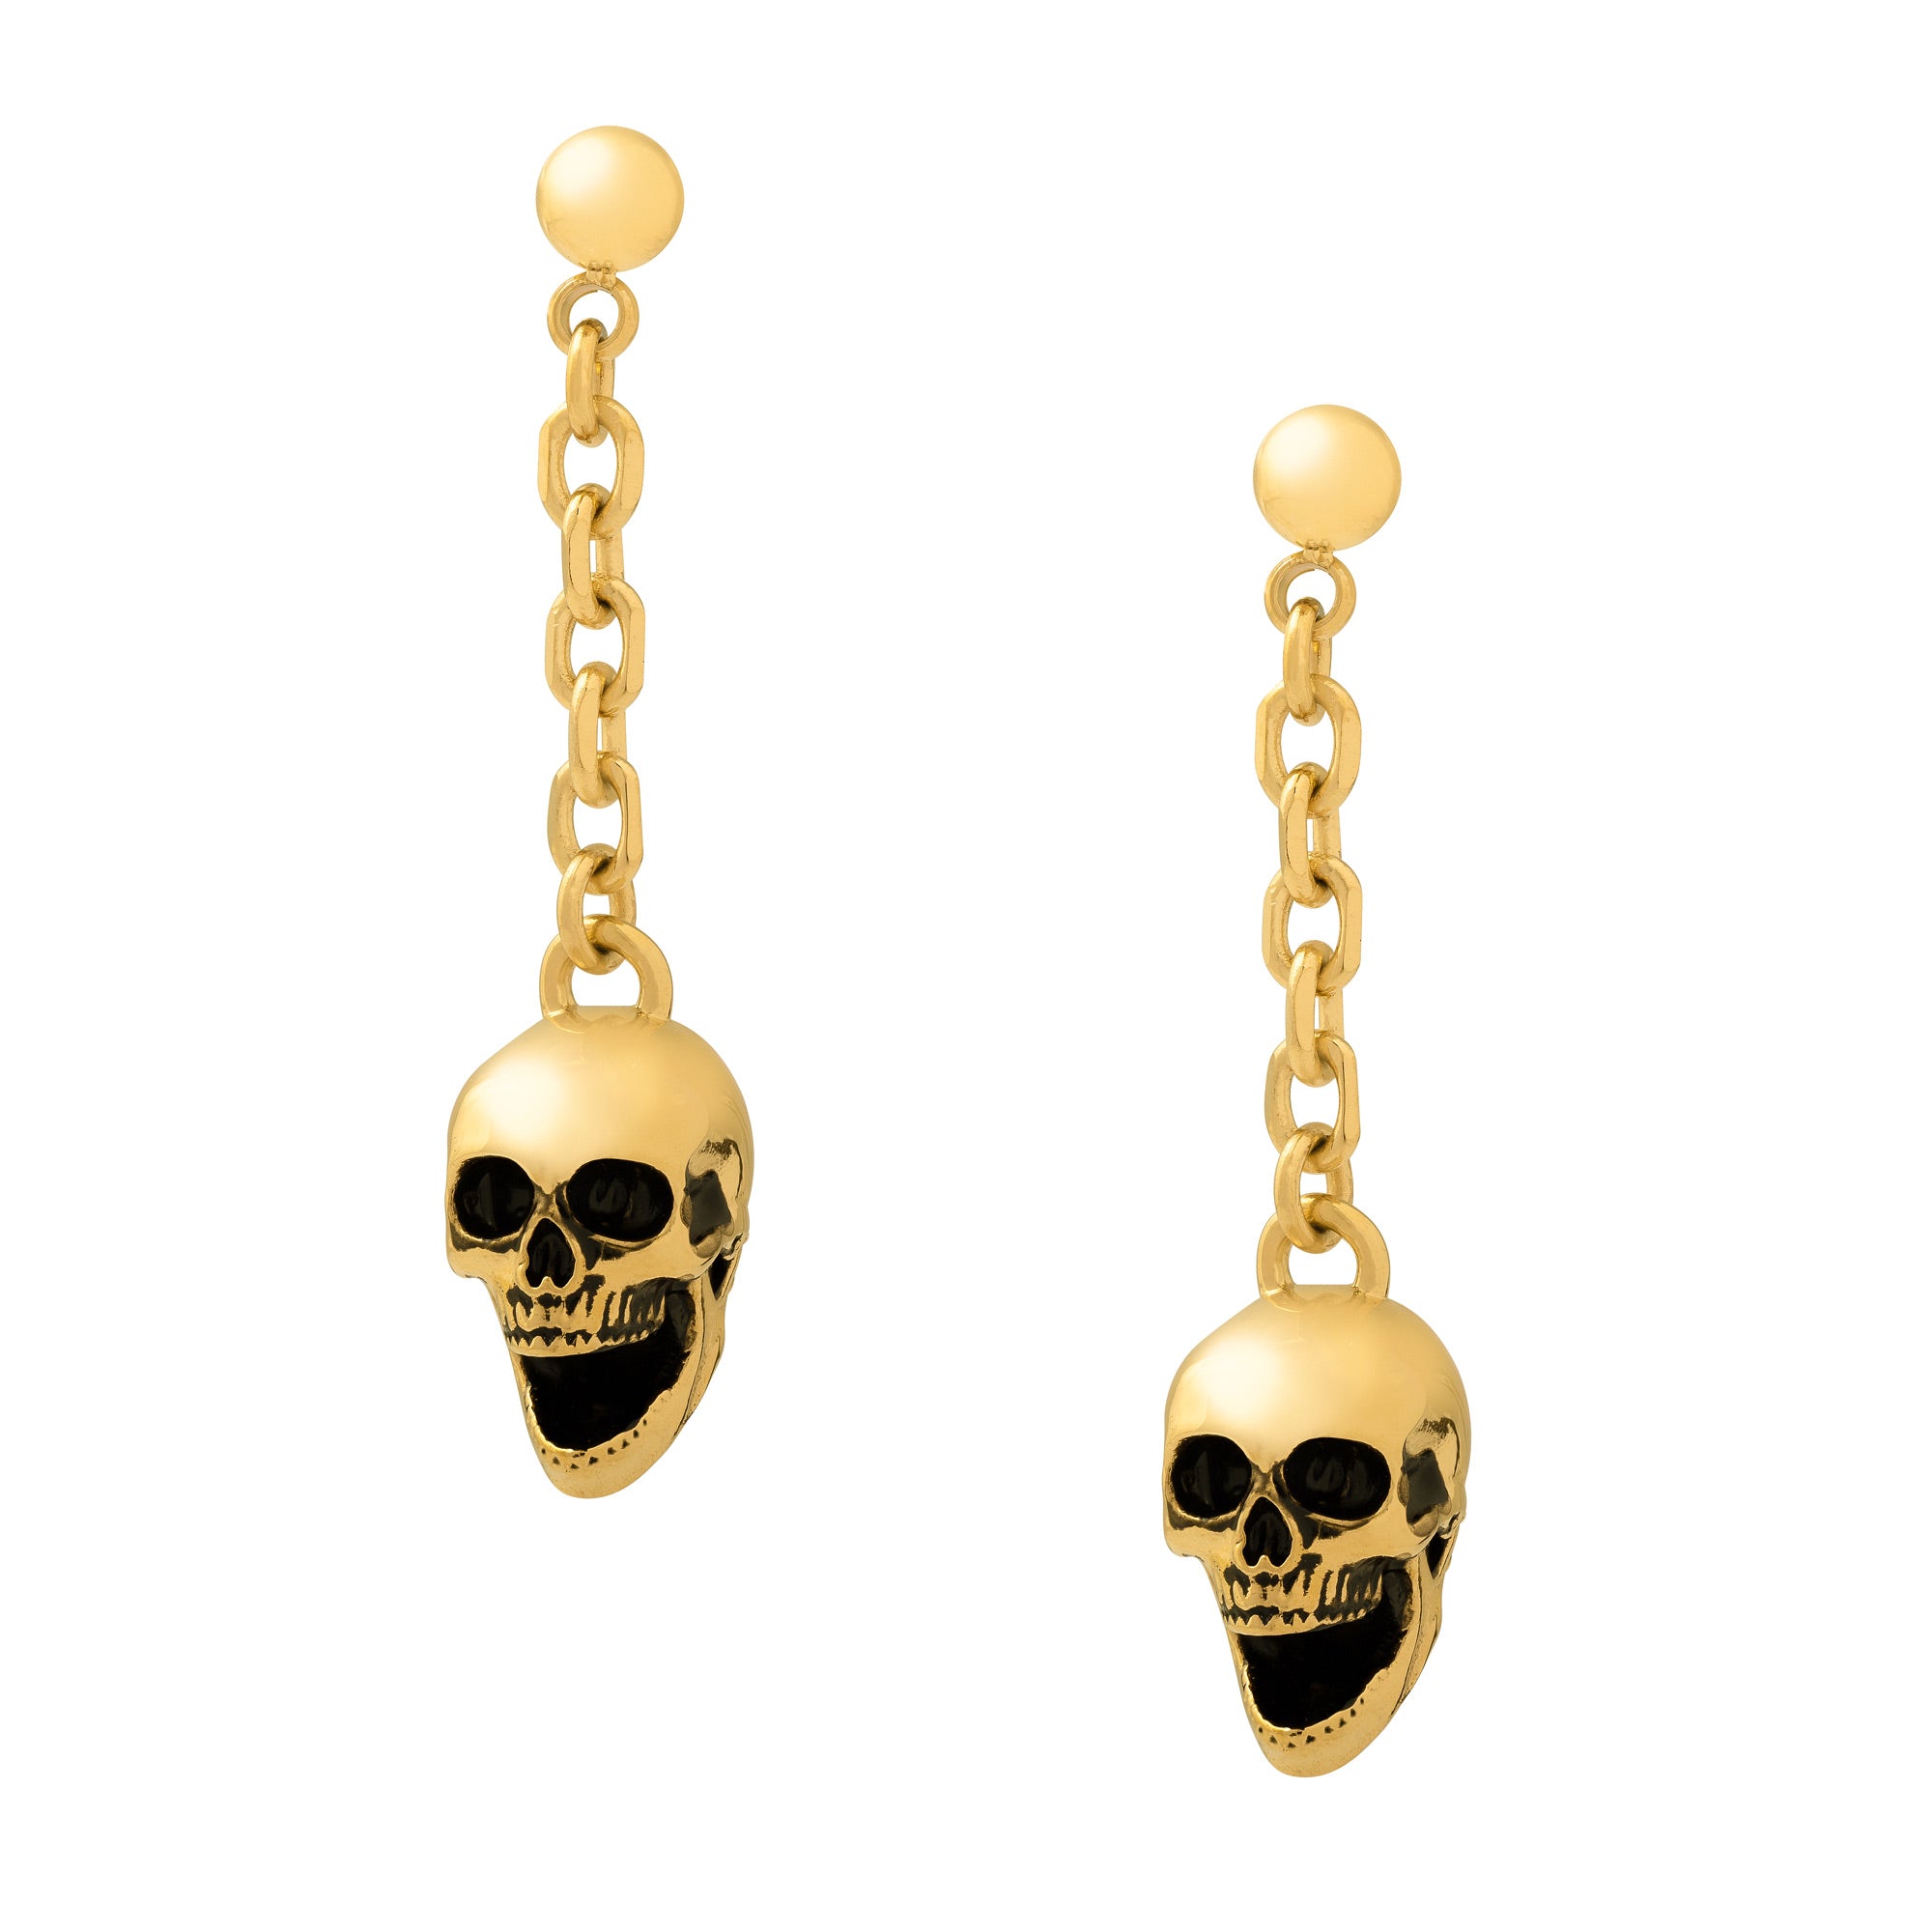 Gold chained laughing skull pendant earrings